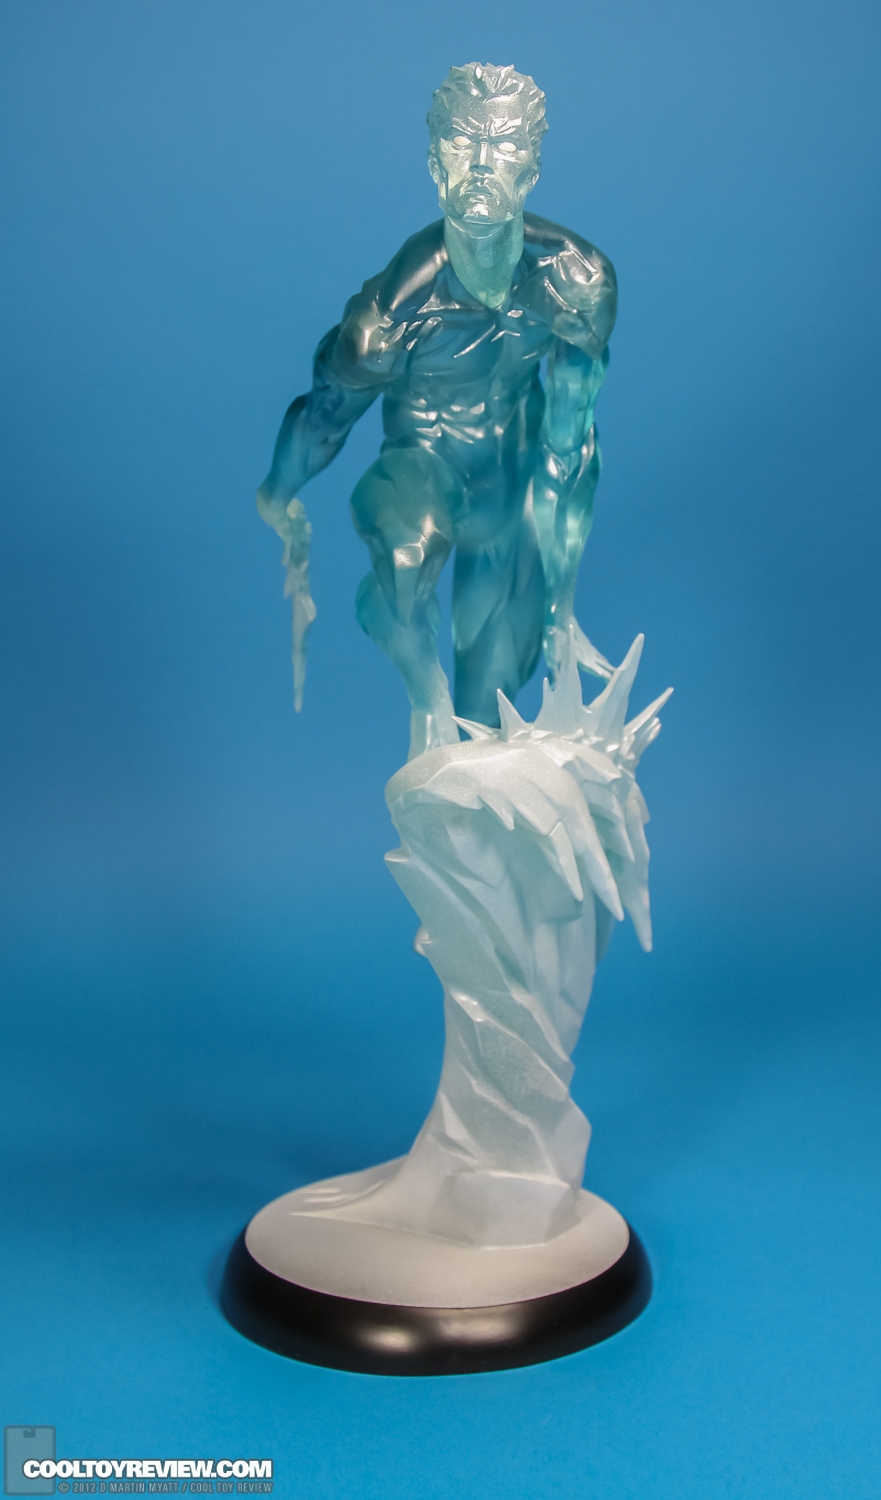 Iceman_Comiquette_Sideshow_Collectibles-05.jpg